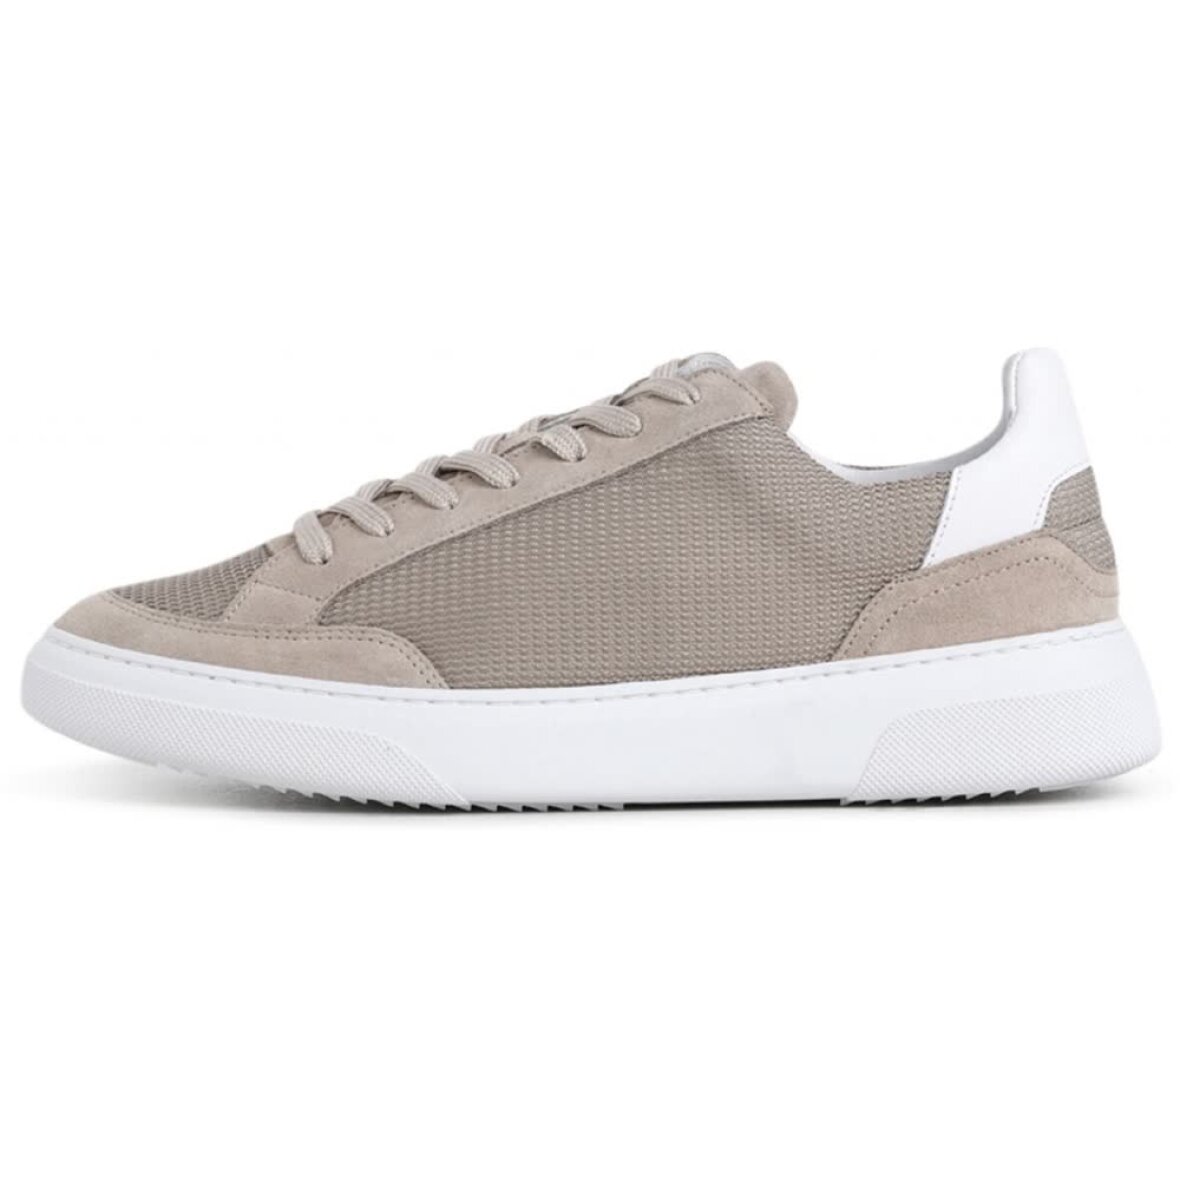 Off Court Sneakers - Find nye styles fra Garment Project her